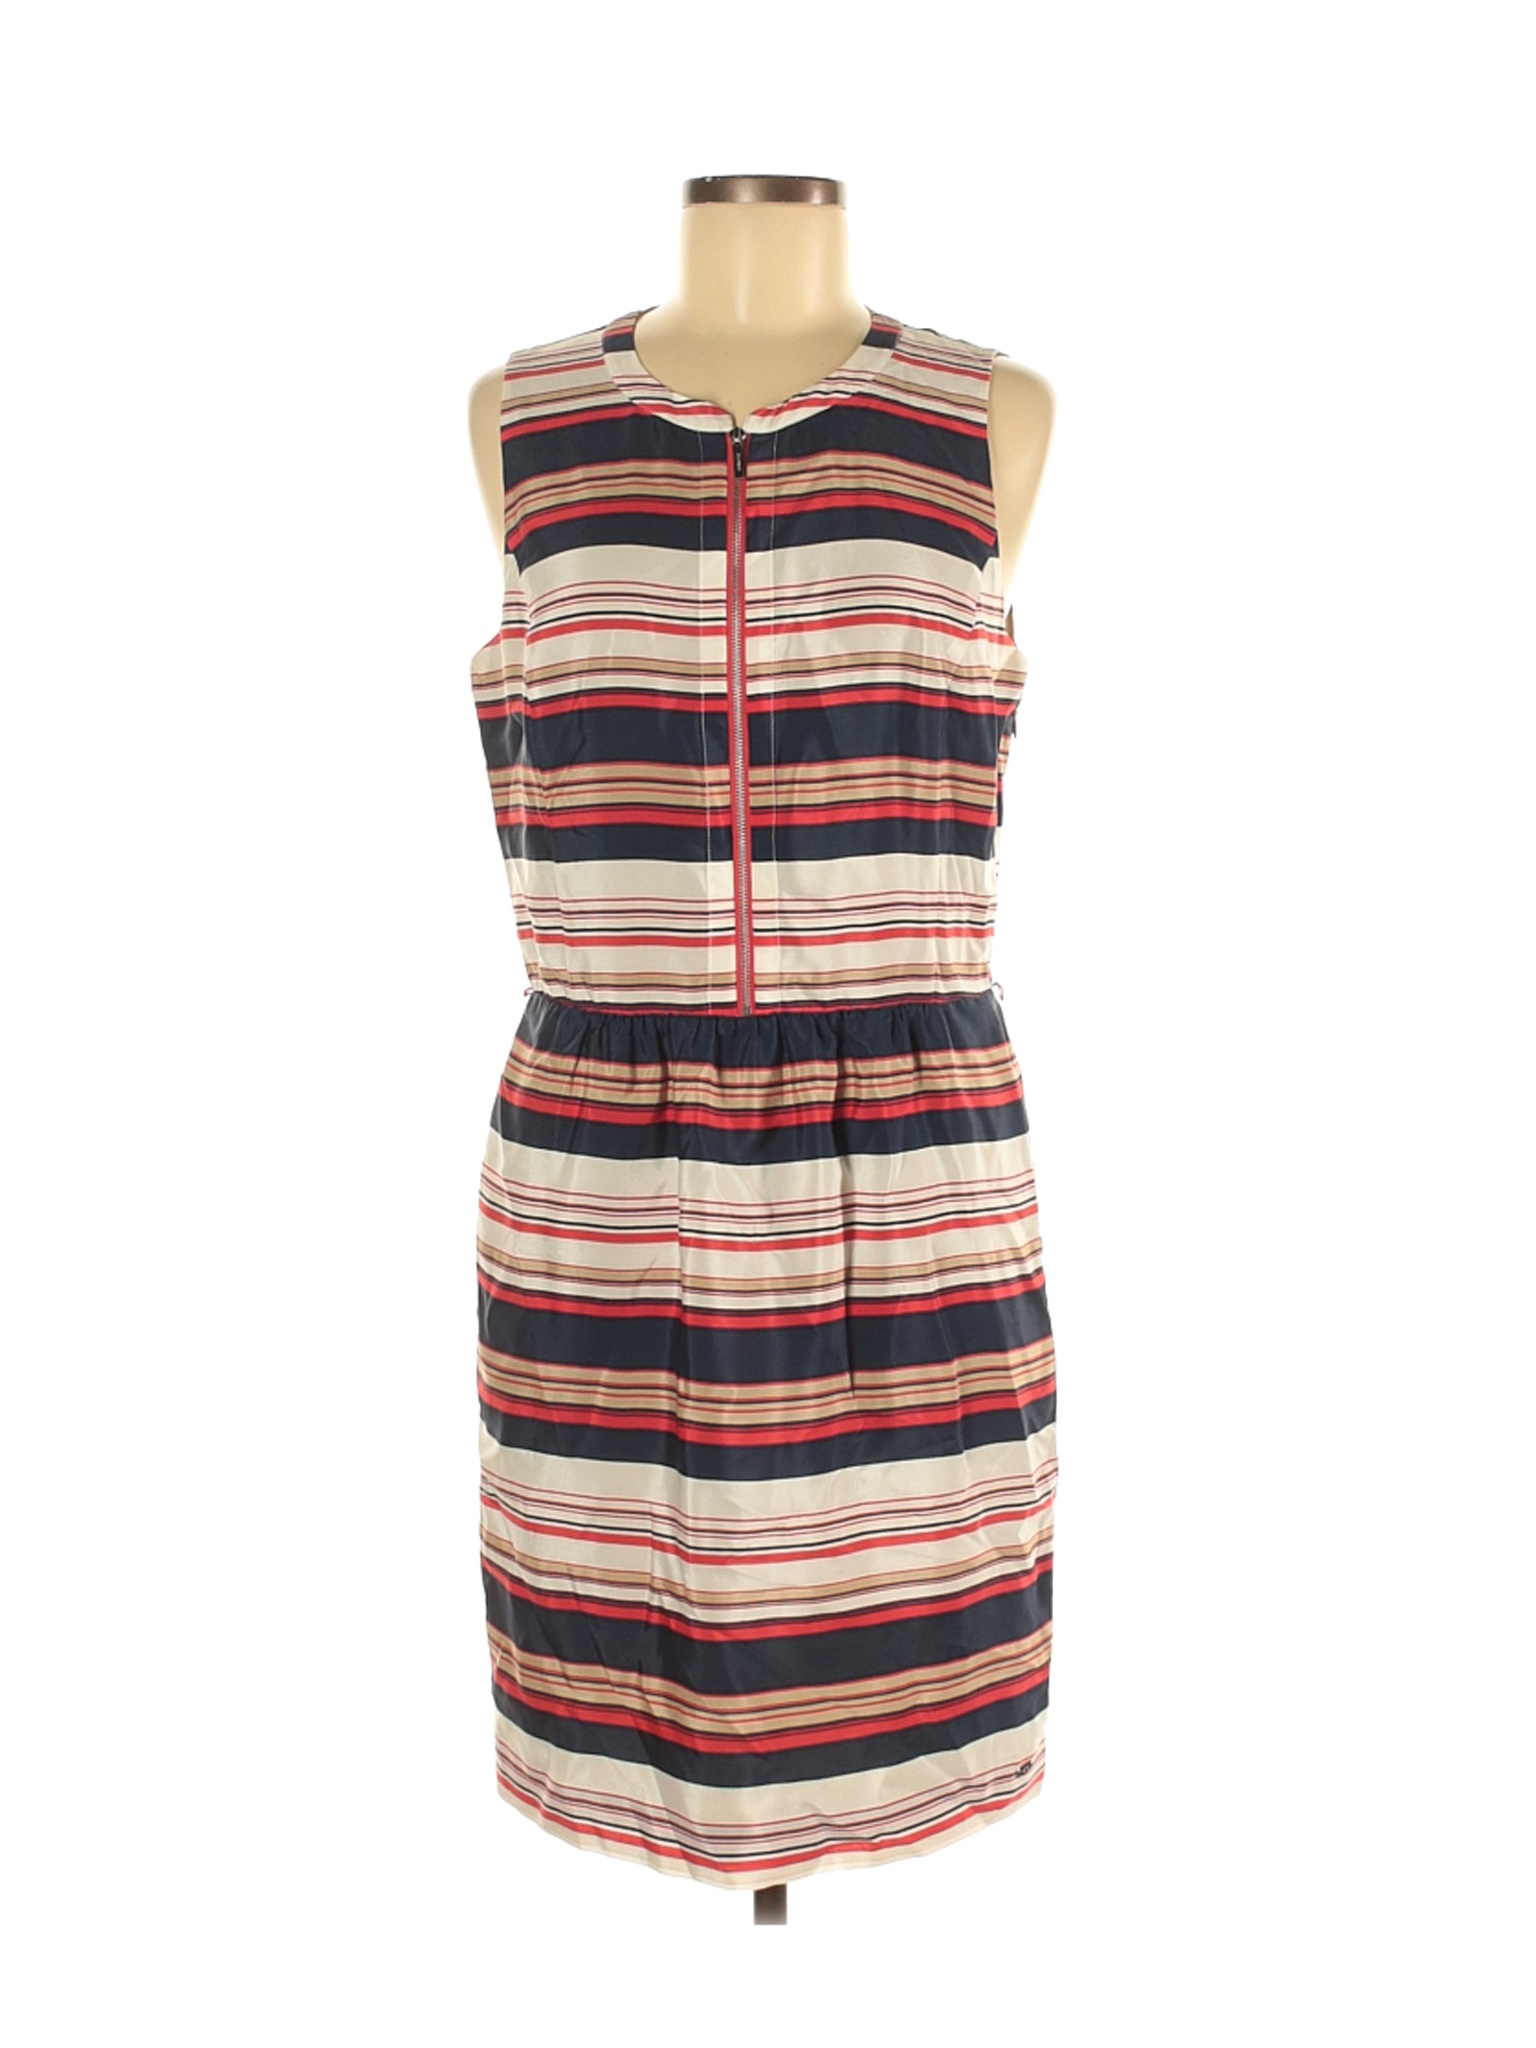 Tommy Hilfiger 100% Silk Stripes Red Casual Dress Size 10 - 83% off ...